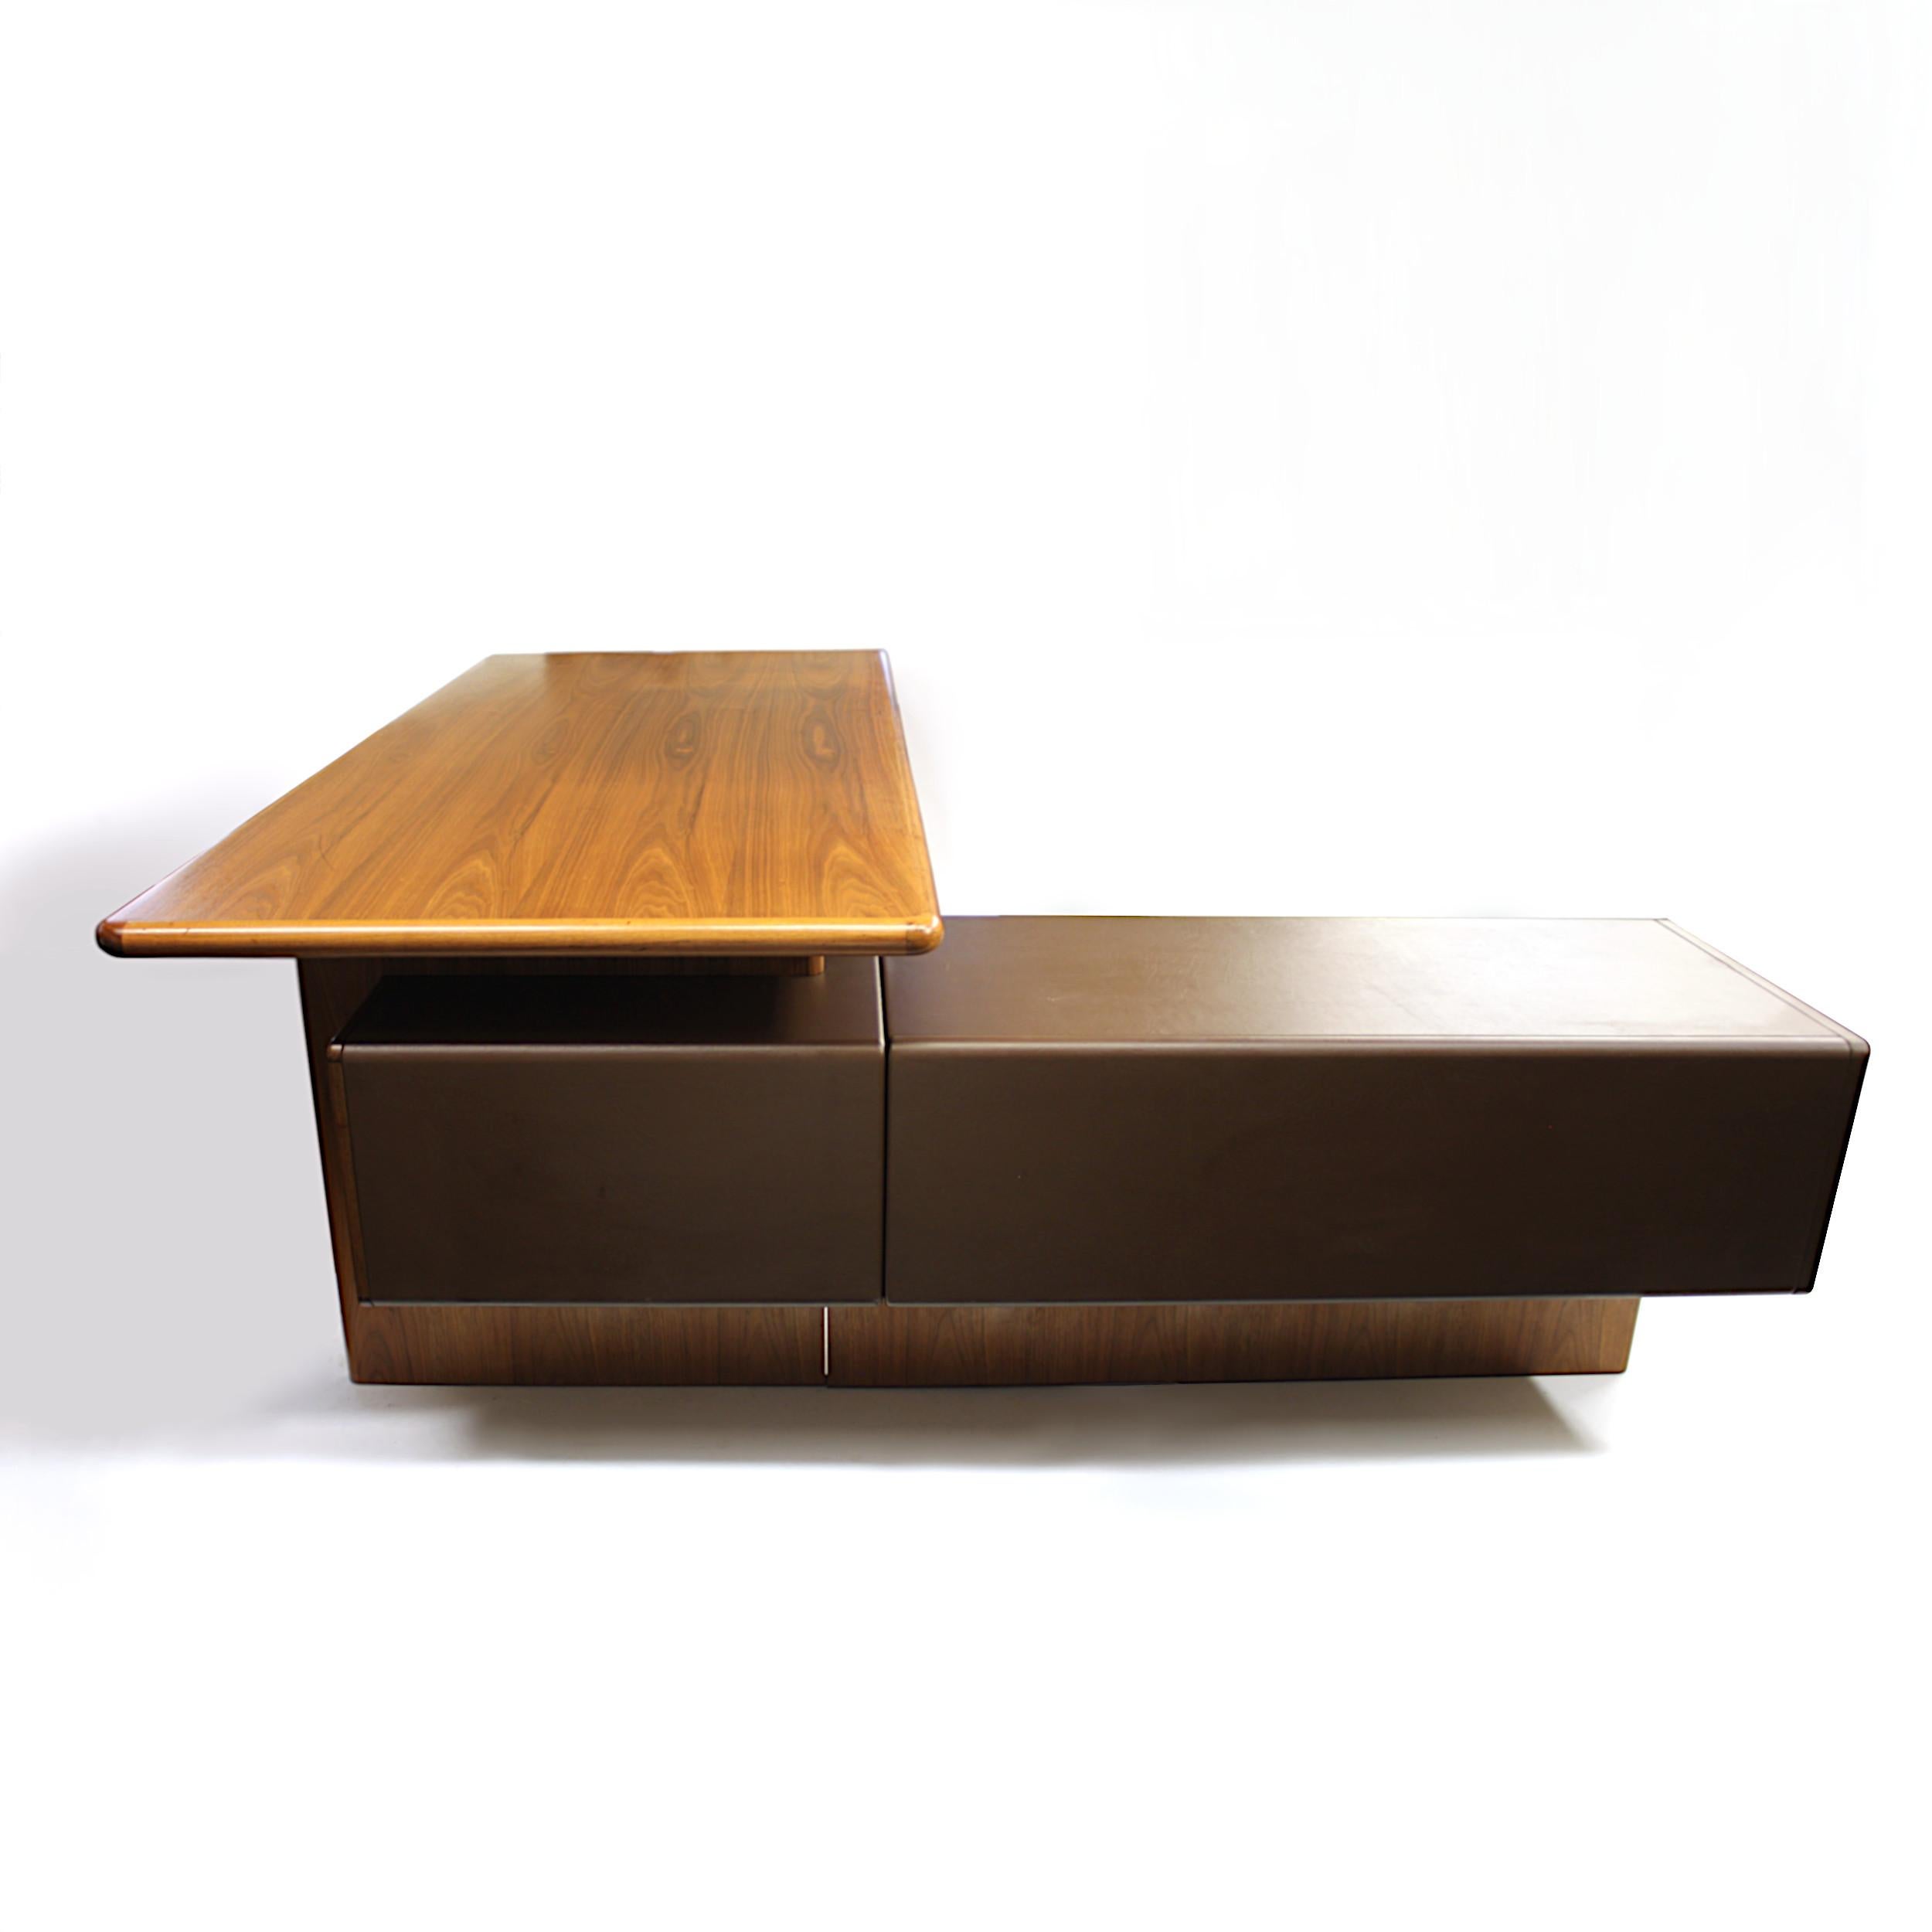 English Mid-Century Modern GR90 L-Shaped Executive Desk by Ray Leigh for Gordon Russell